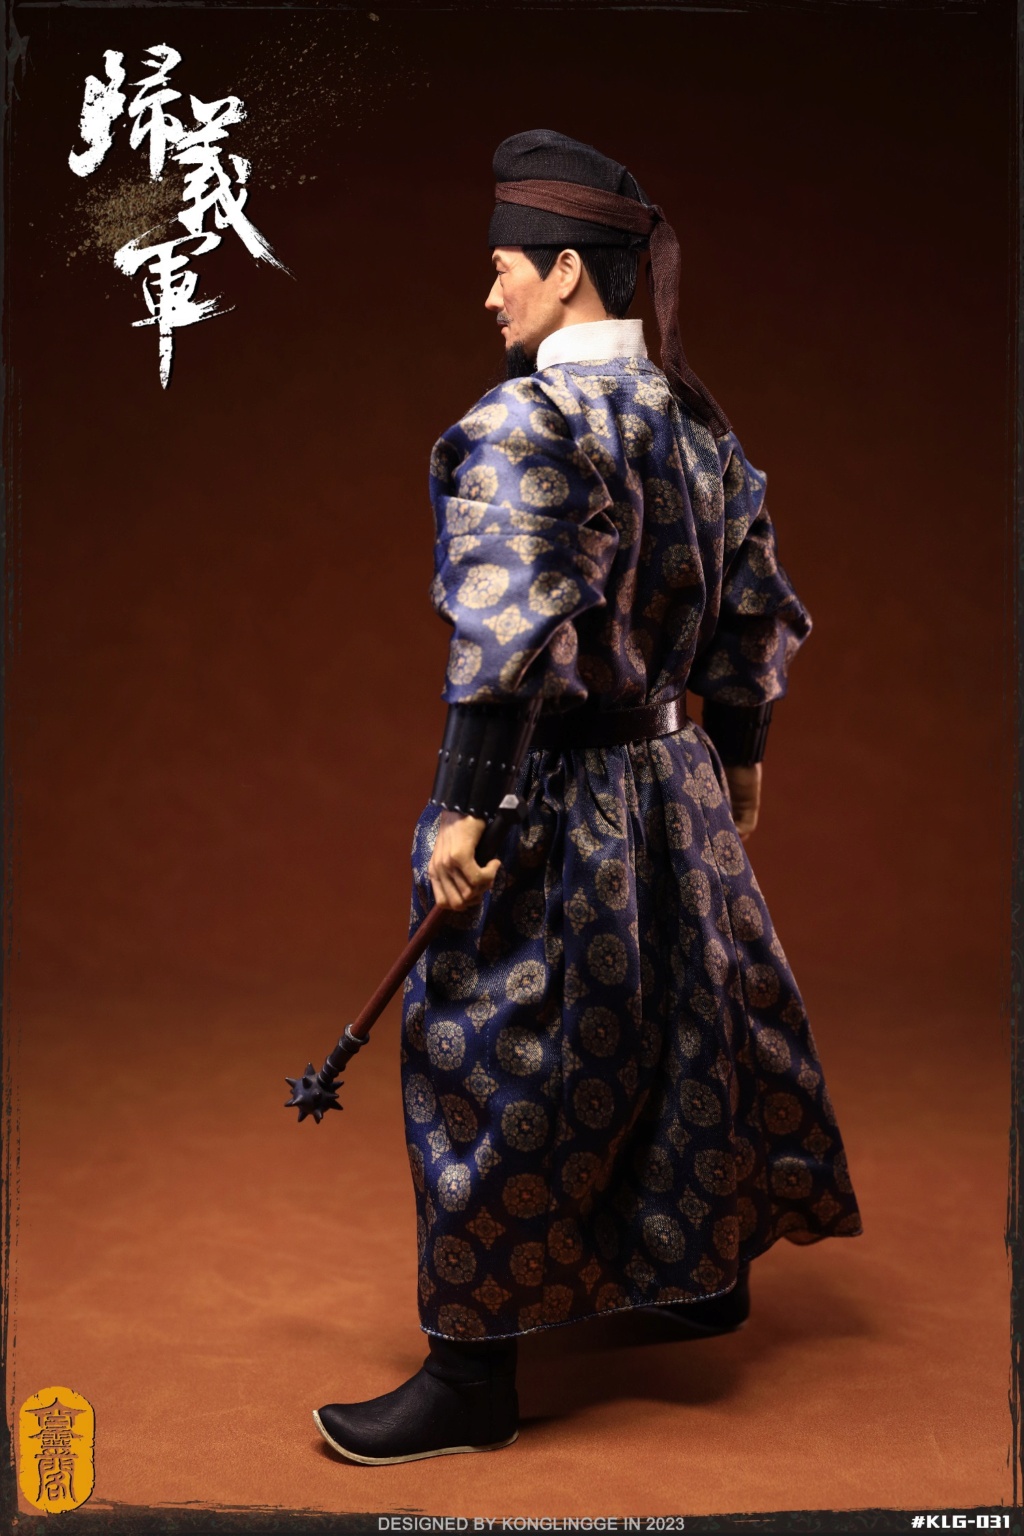 GuiyiArmy - NEW PRODUCT: KongLingGe: 1/6 scale Guiyi Army (848-1036 AD) action figure （#KLG-R031） 14031610